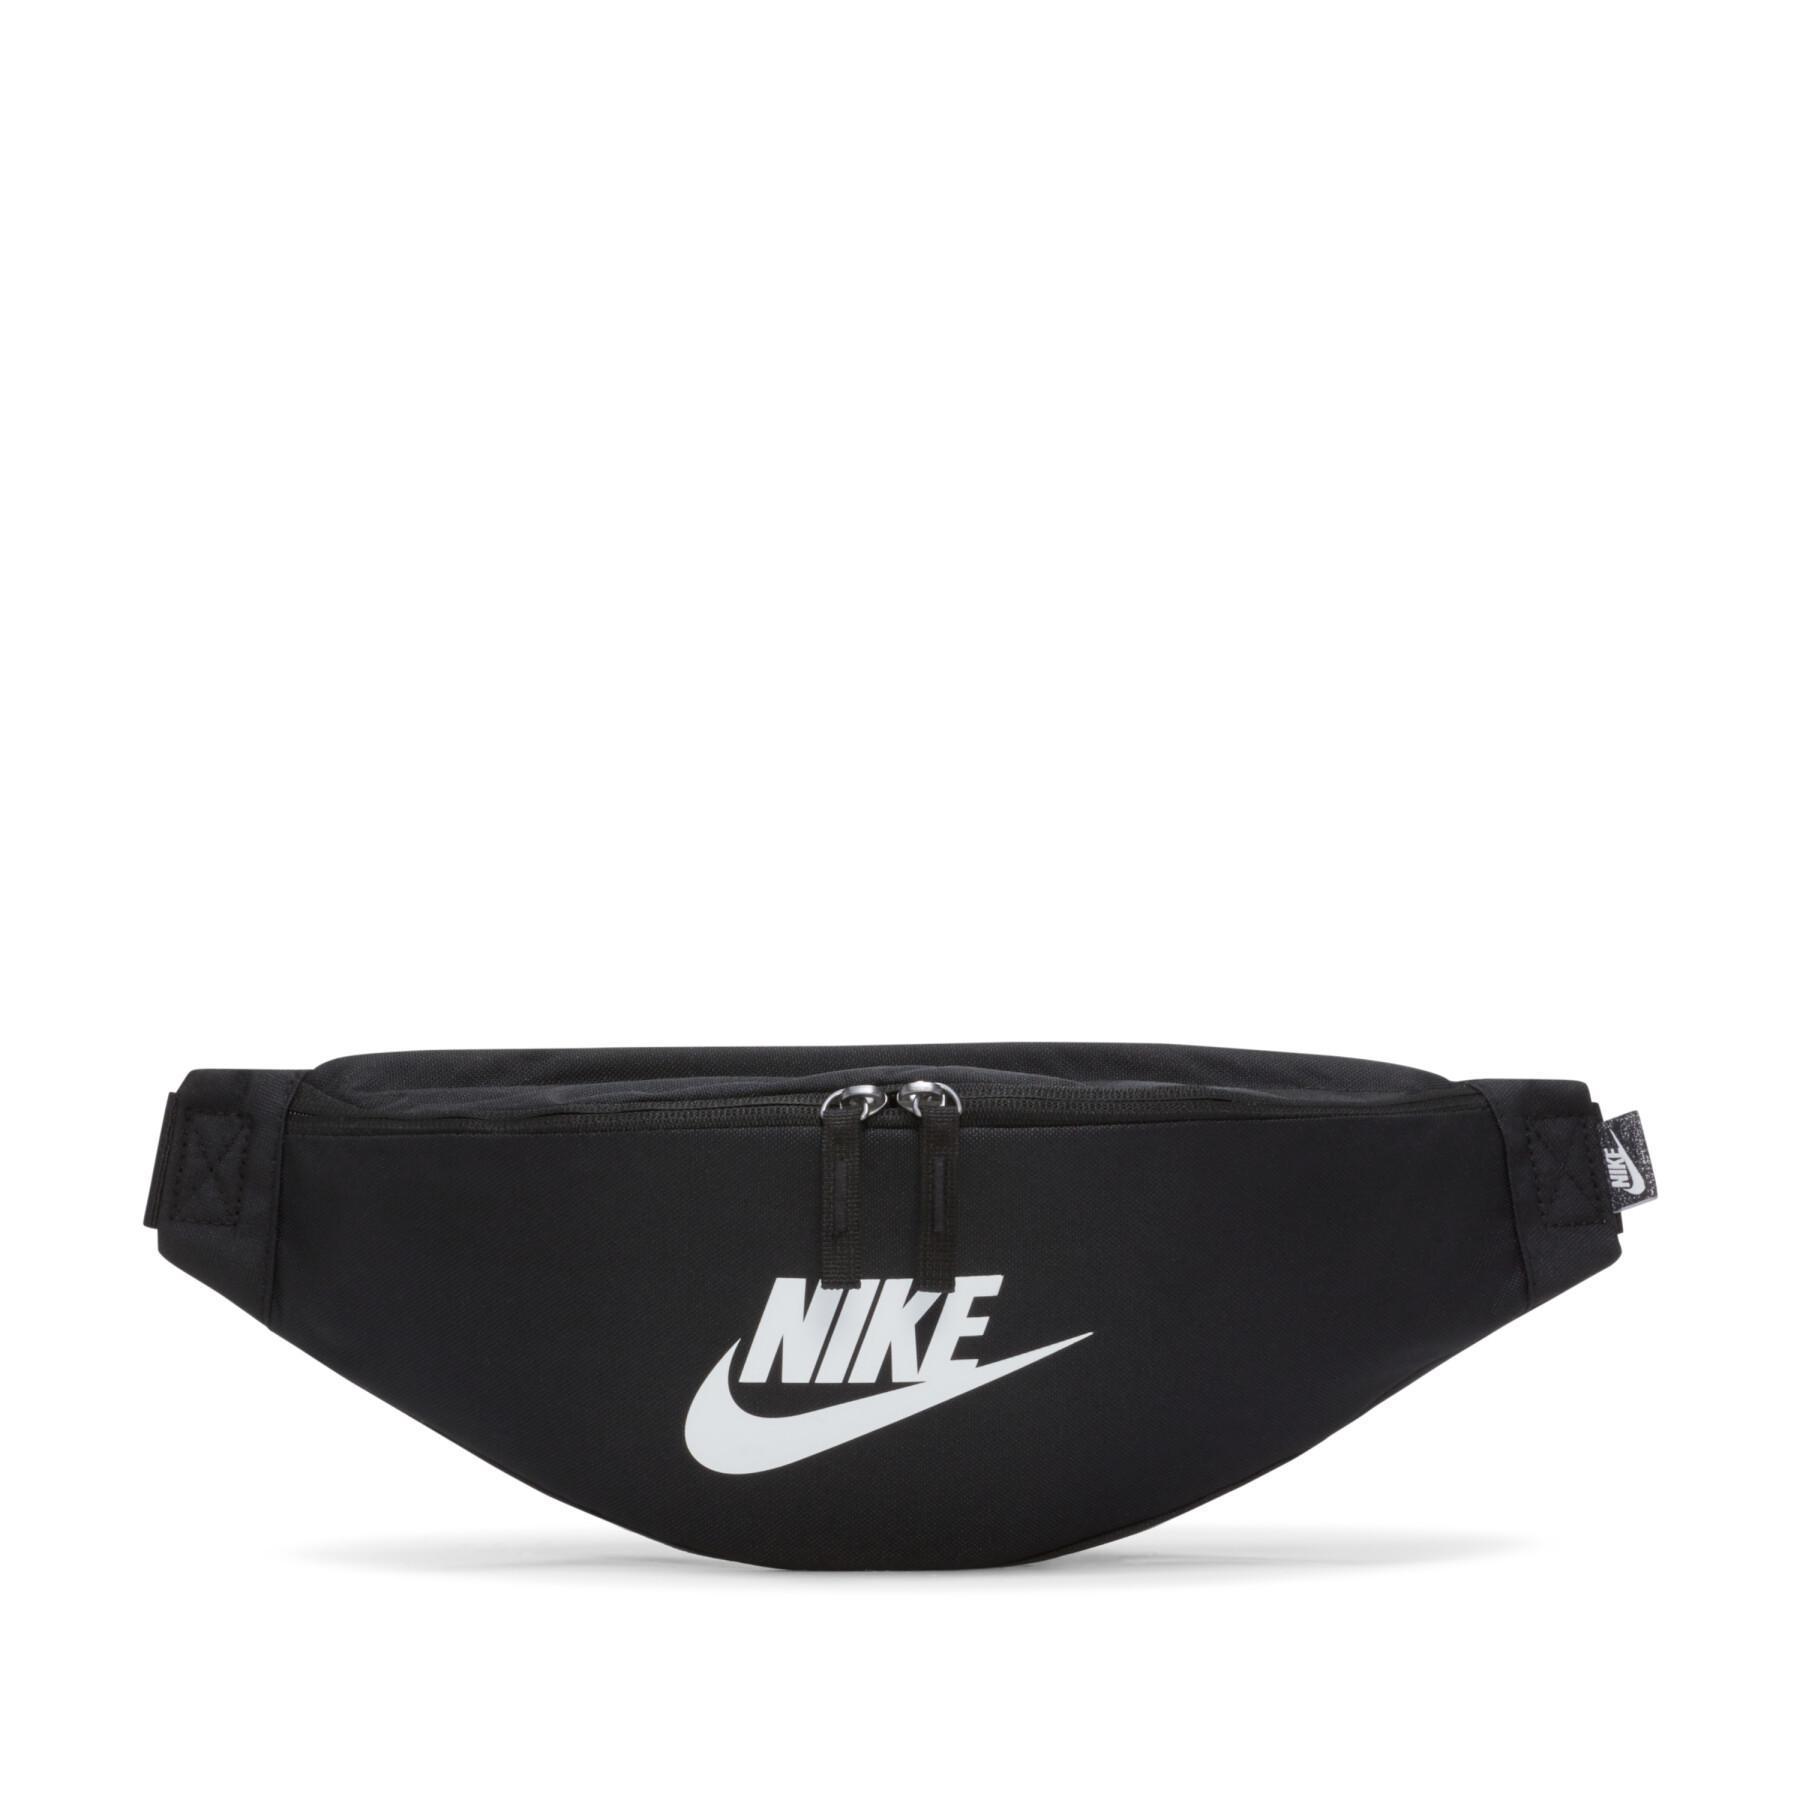 Fanny pack Nike Heritage - Nike - Brands - Lifestyle